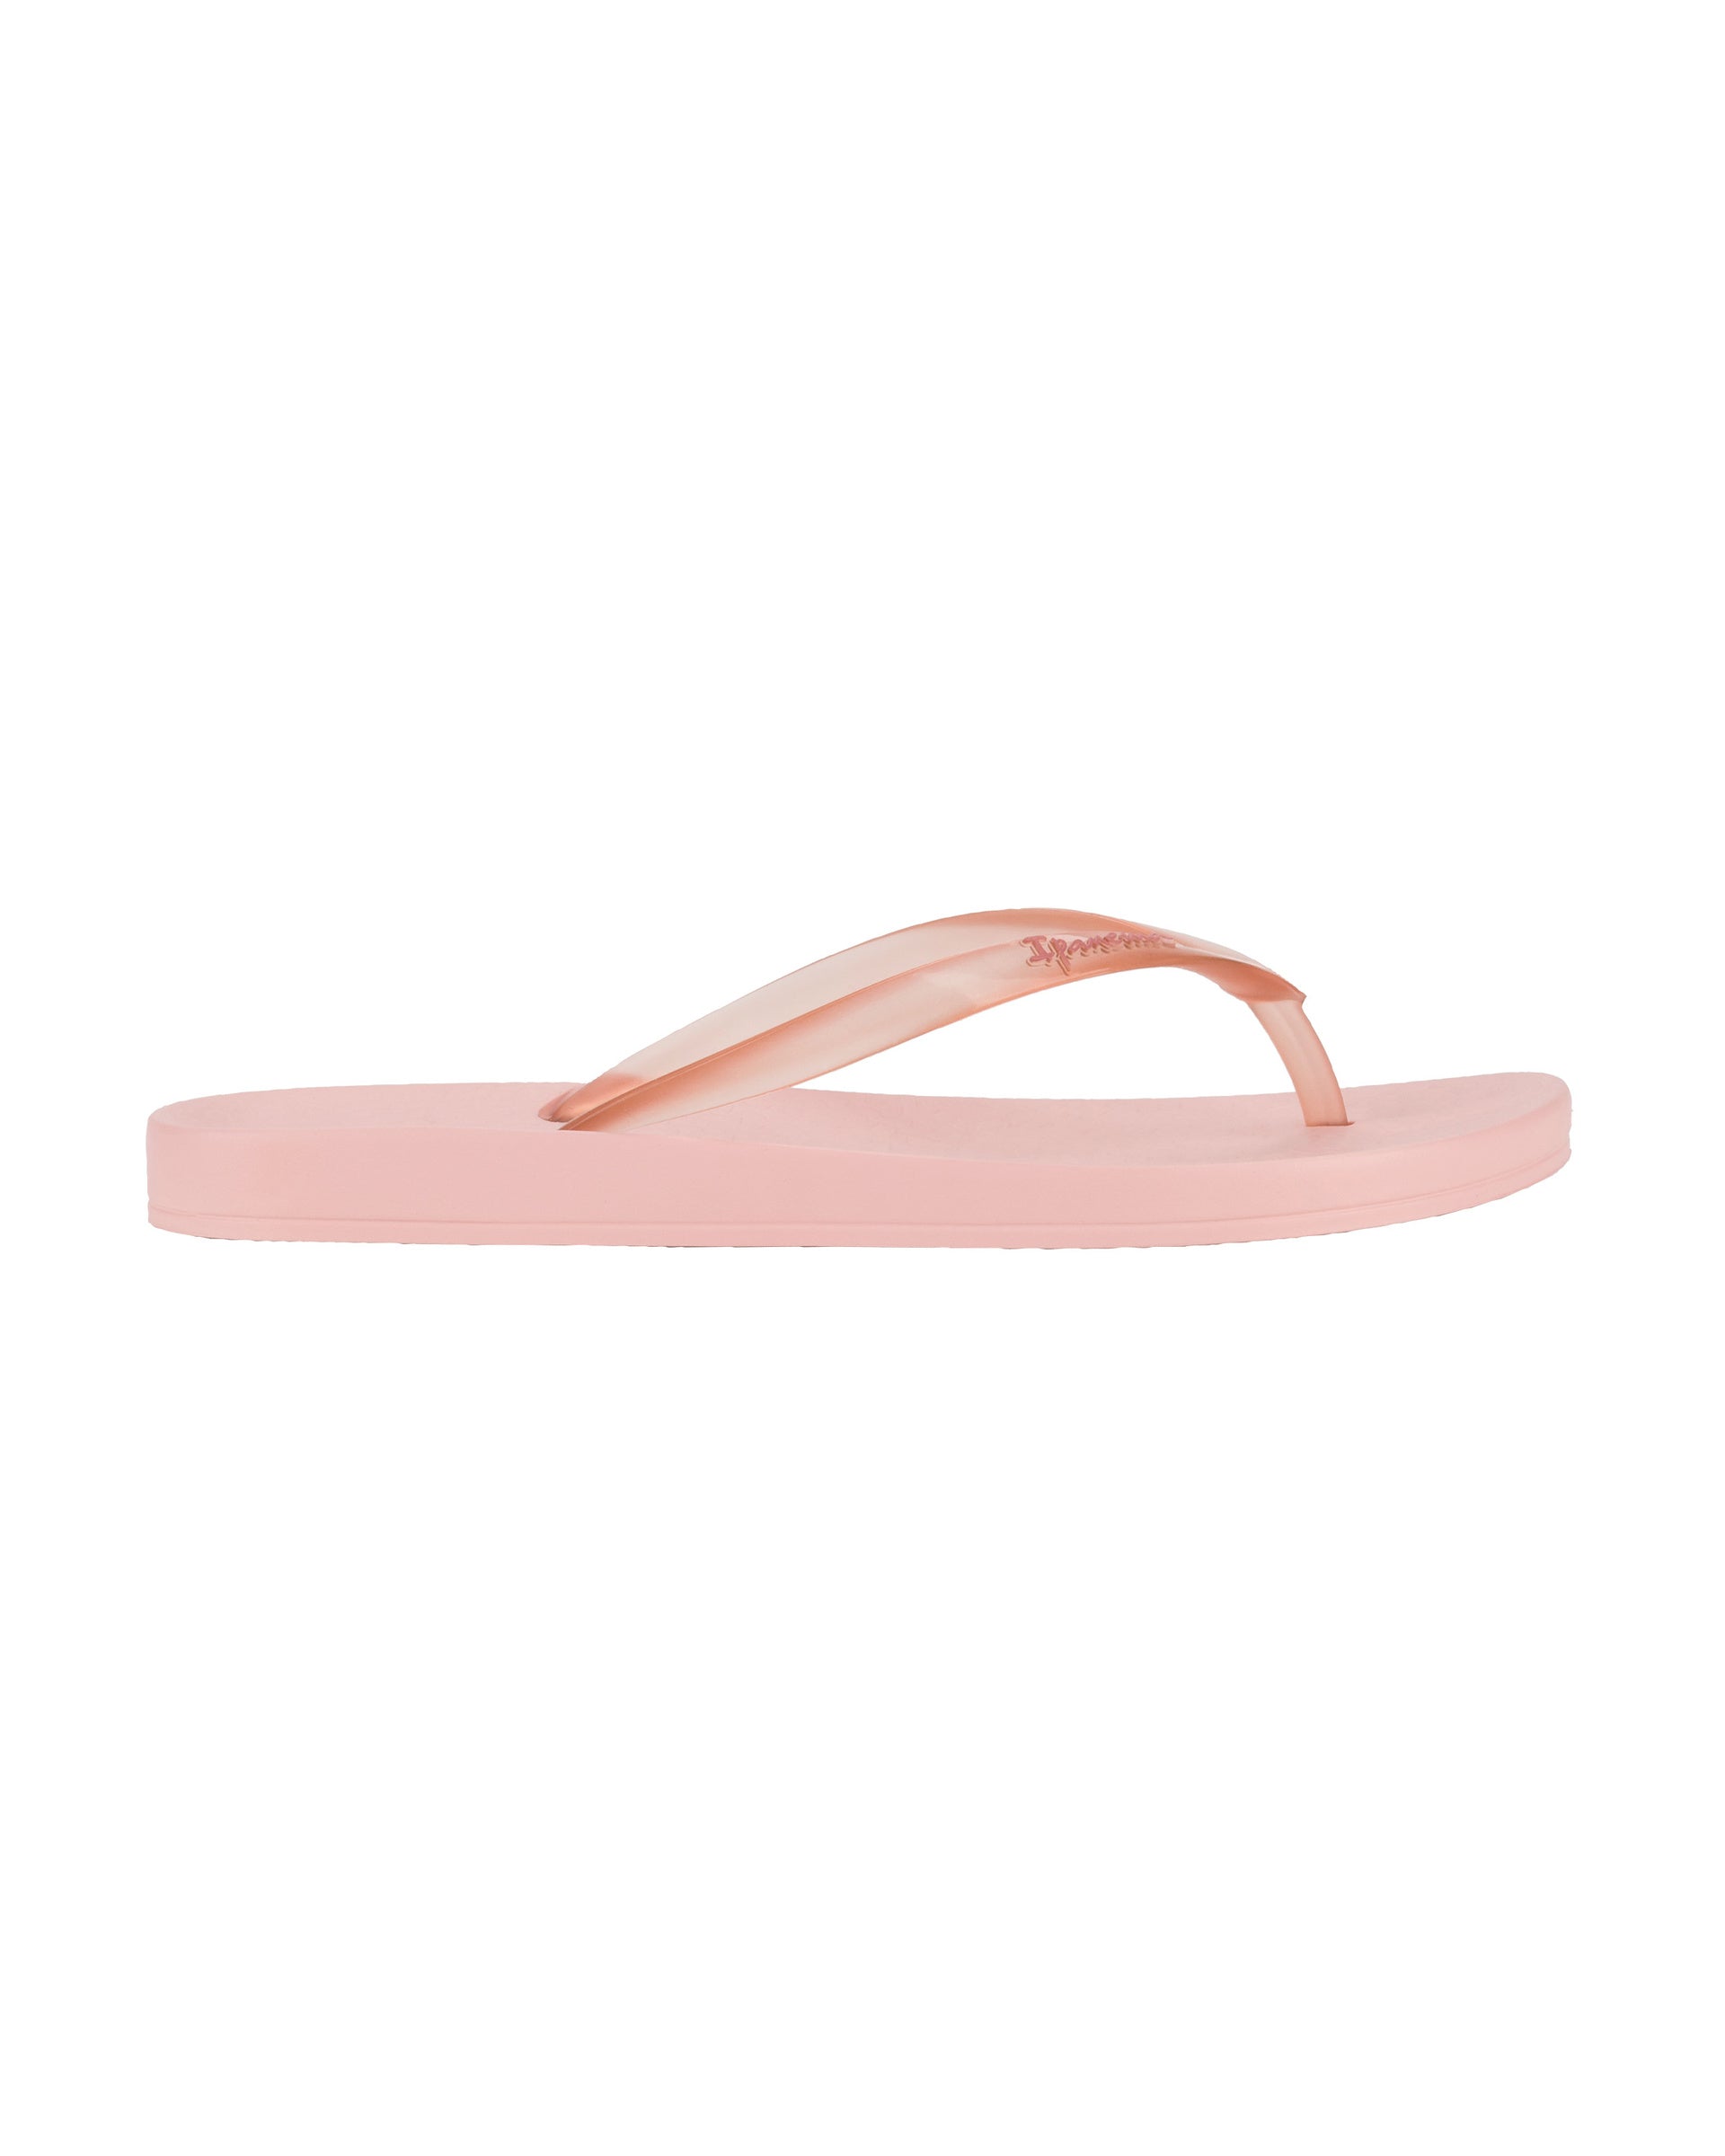 Outer side view of a pink Ipanema Ana Connect women's flip flop with a clear pink strap.